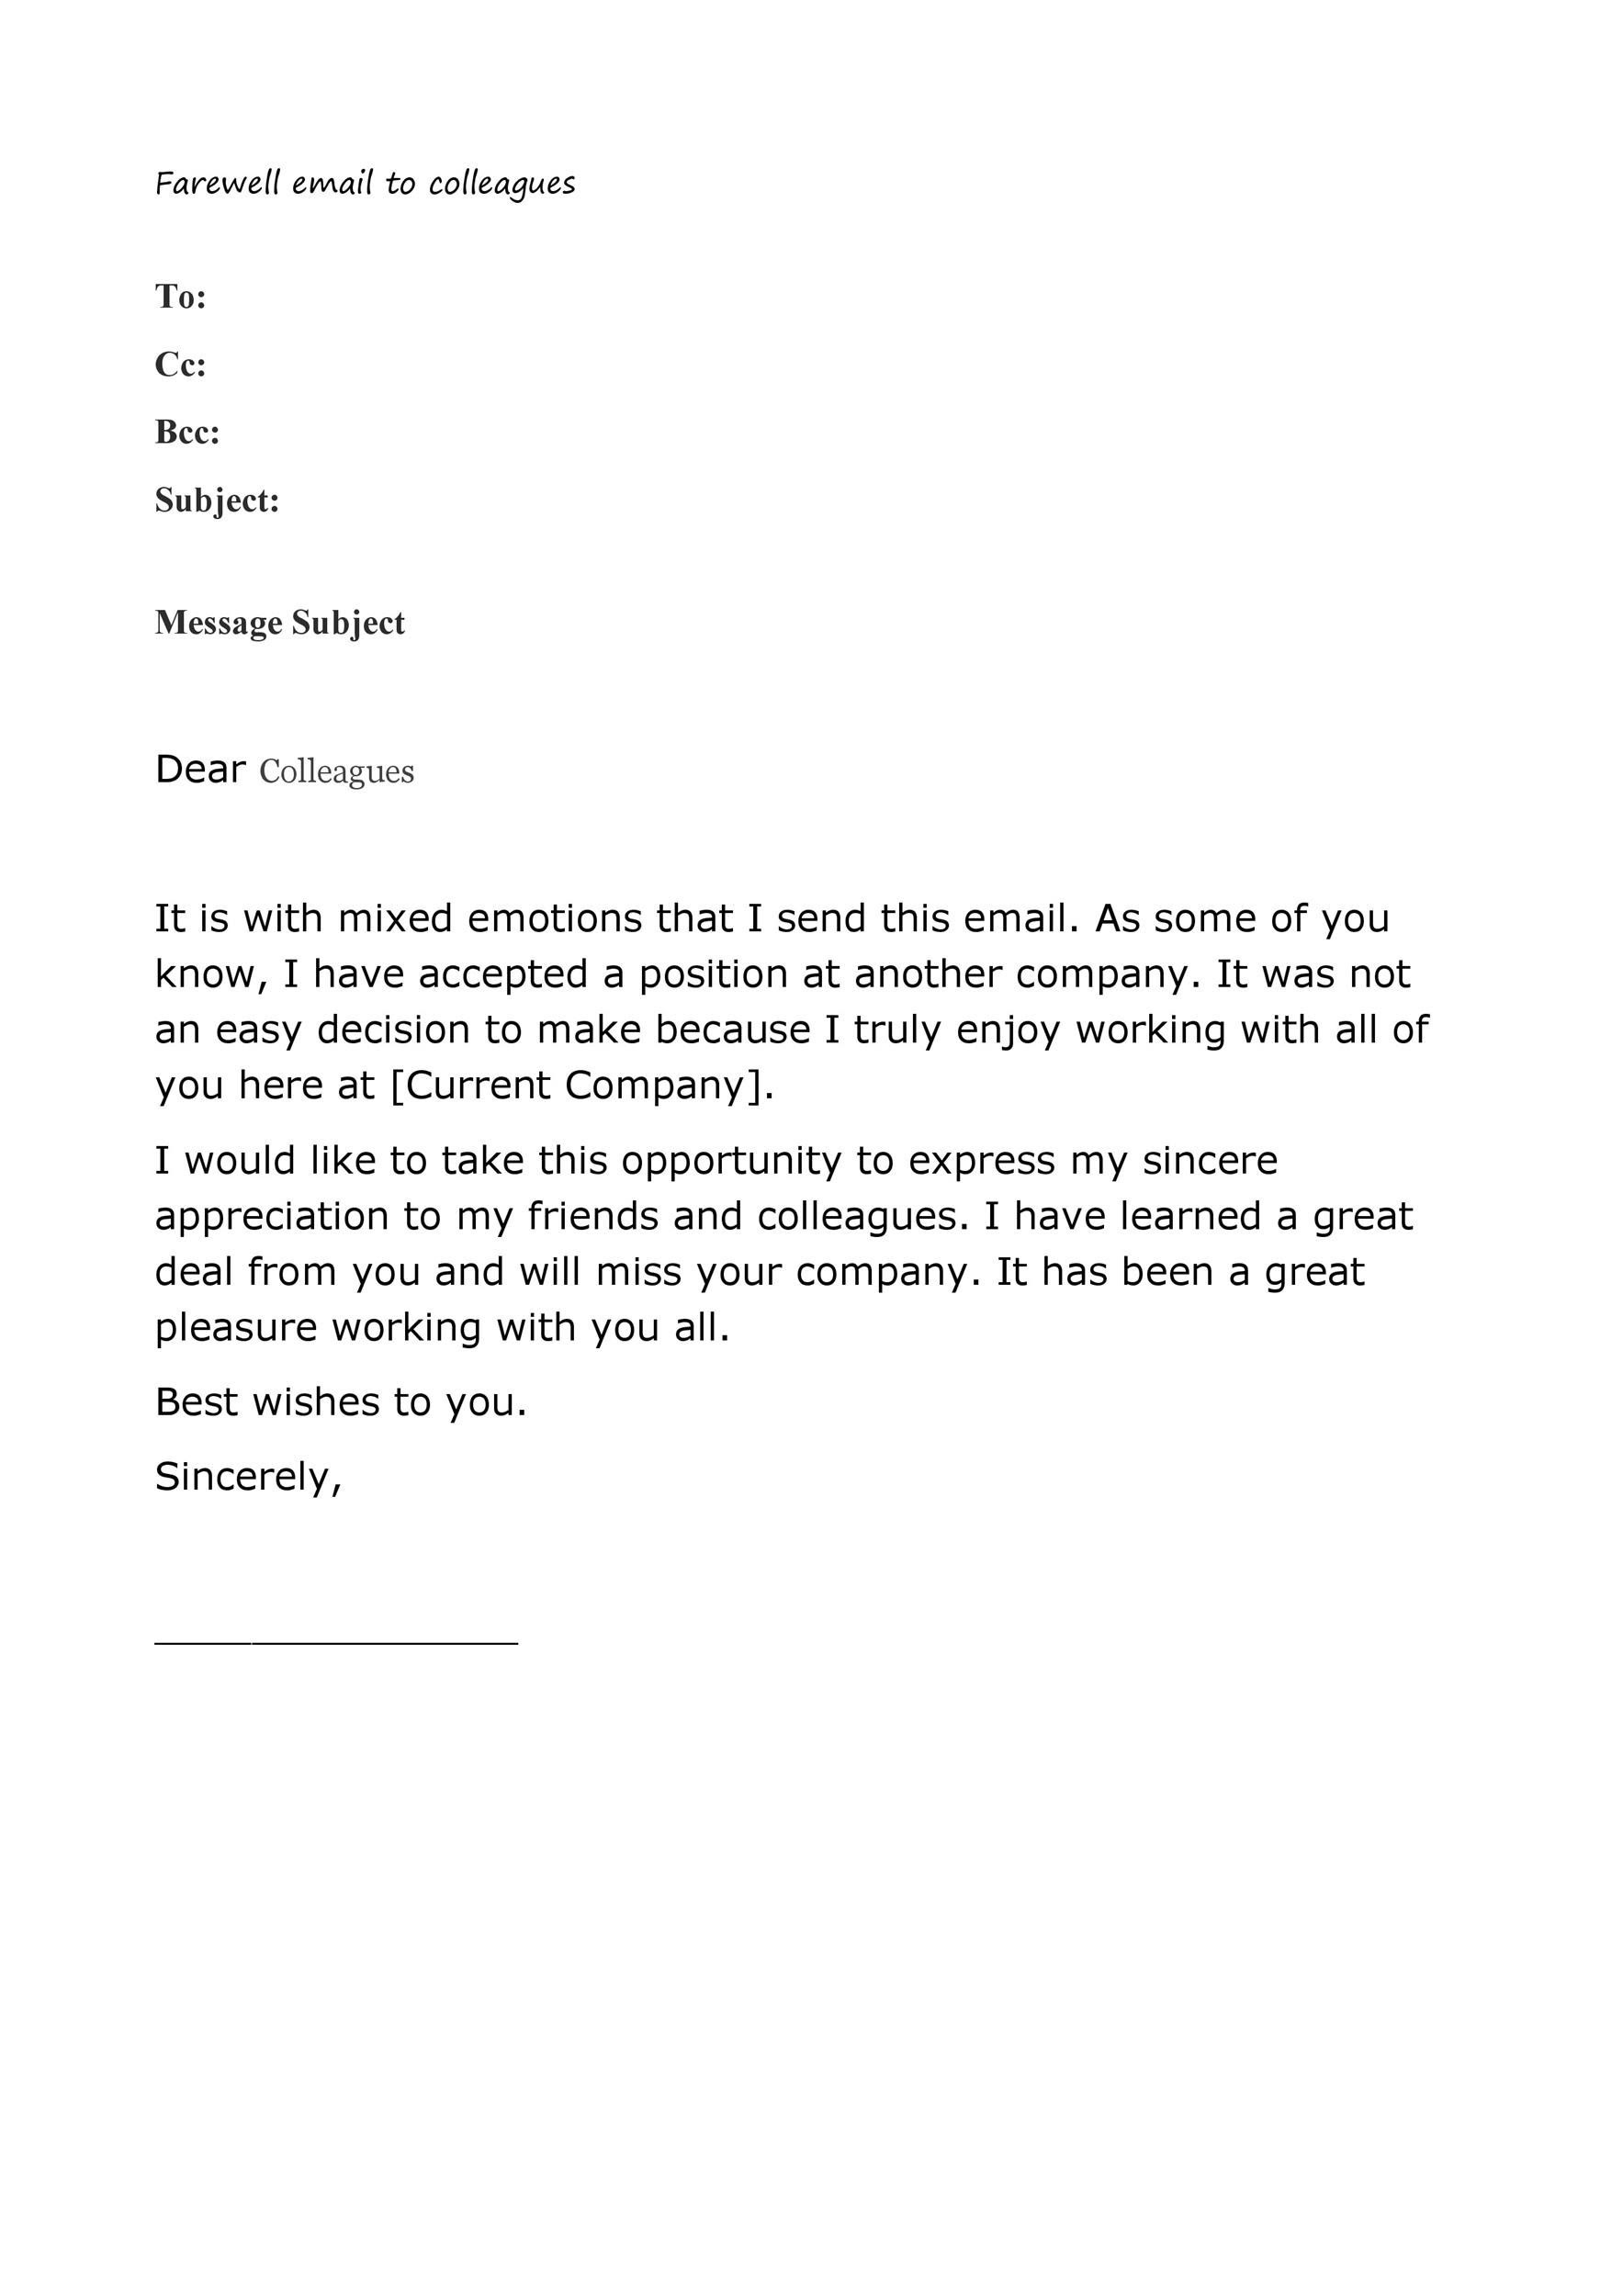 Farewell Mail Sample To Colleagues | Master Template